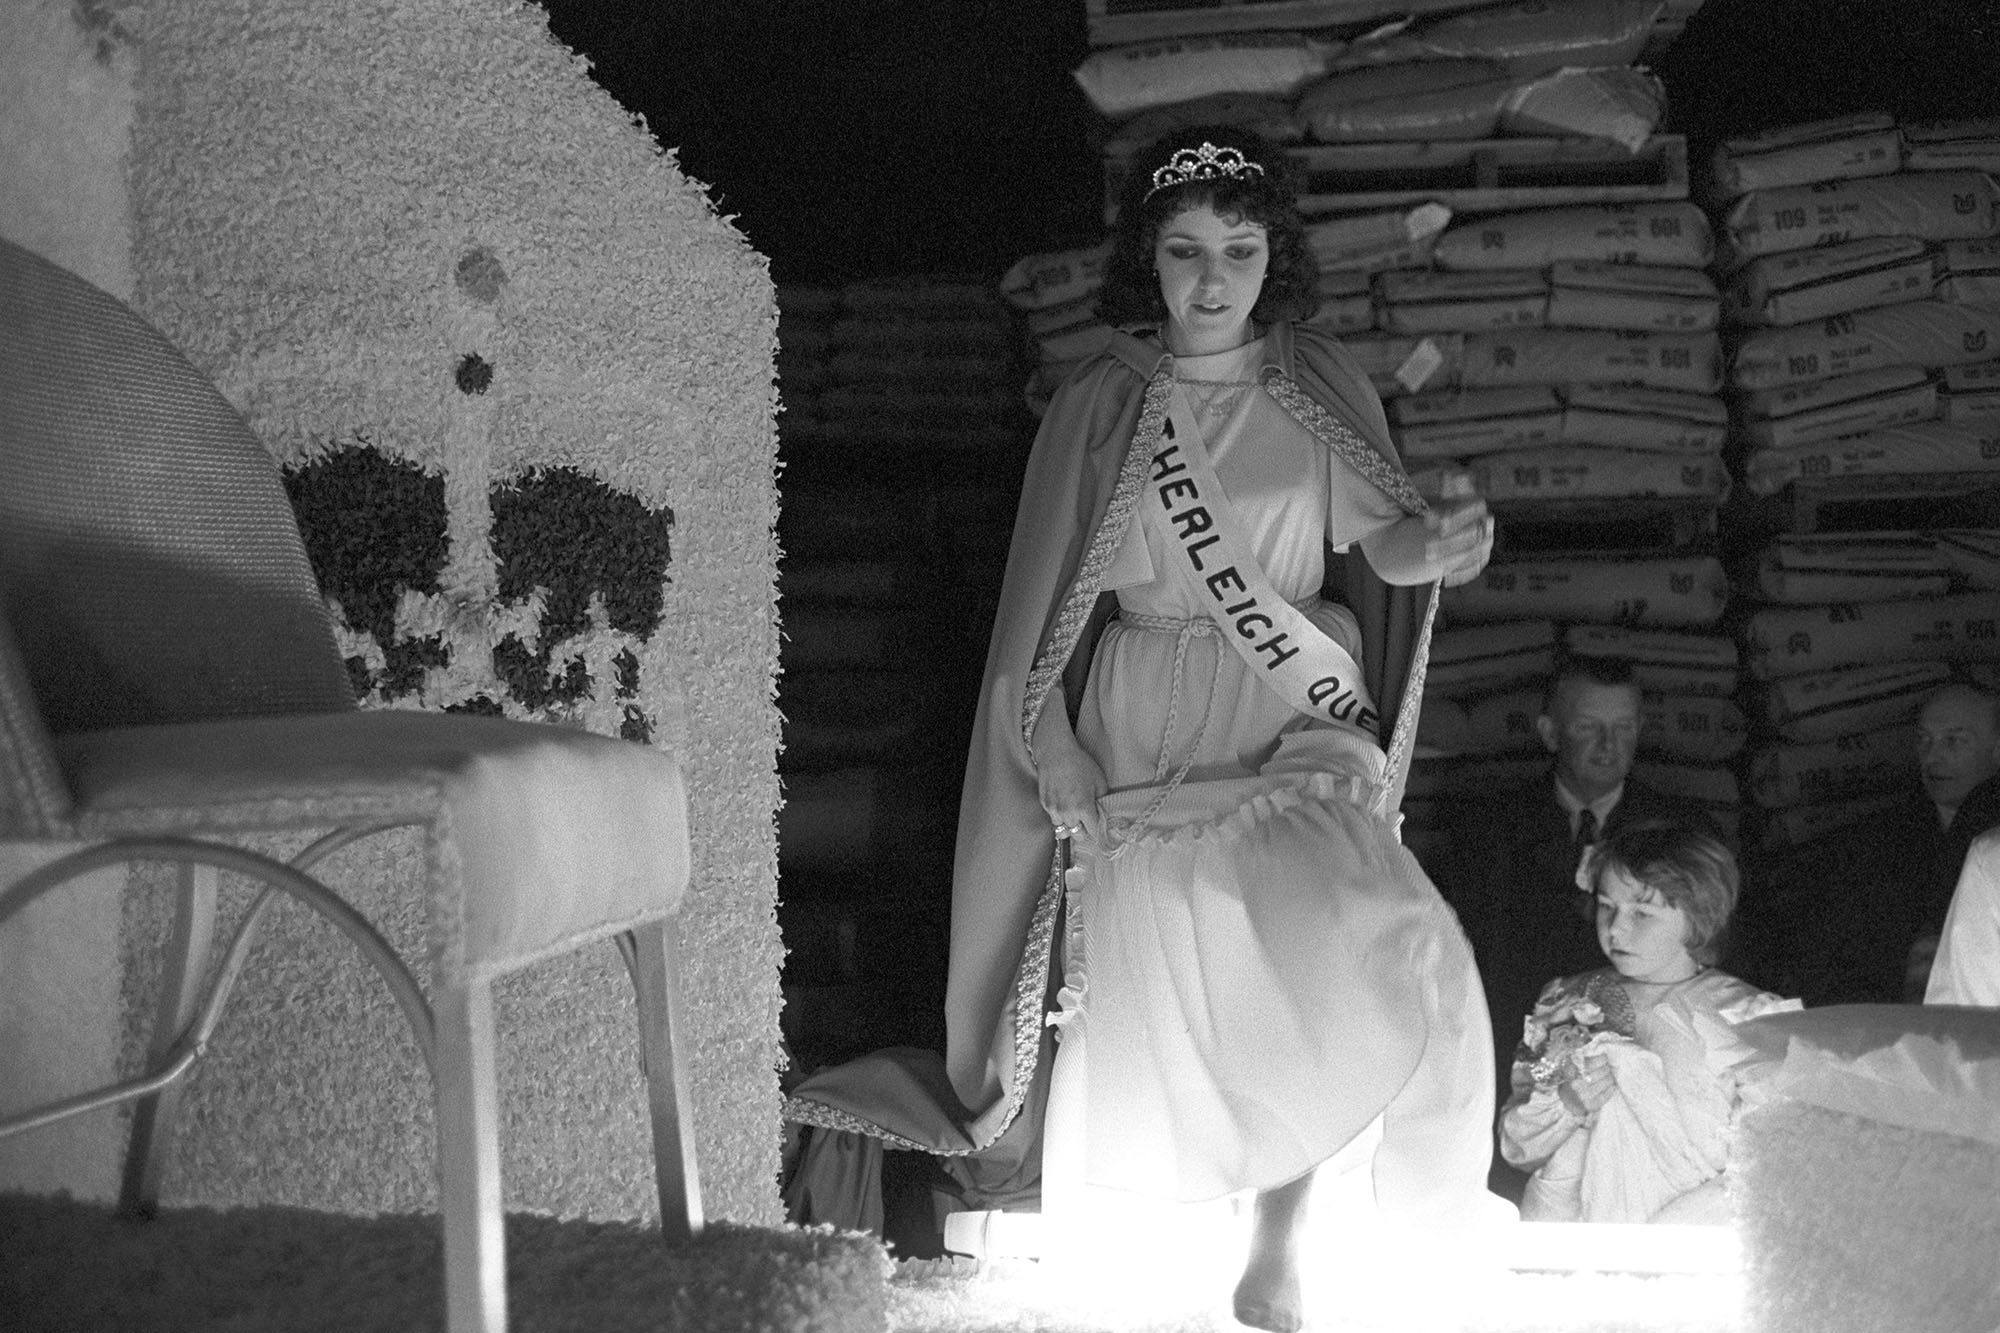 Carnival Queen stepping up to her throne at night. <br /> [Cindy-Jane Dillon, Hatherleigh Carnival Queen stepping up to her throne on a carnival float at Hatherleigh Carnival at night.]